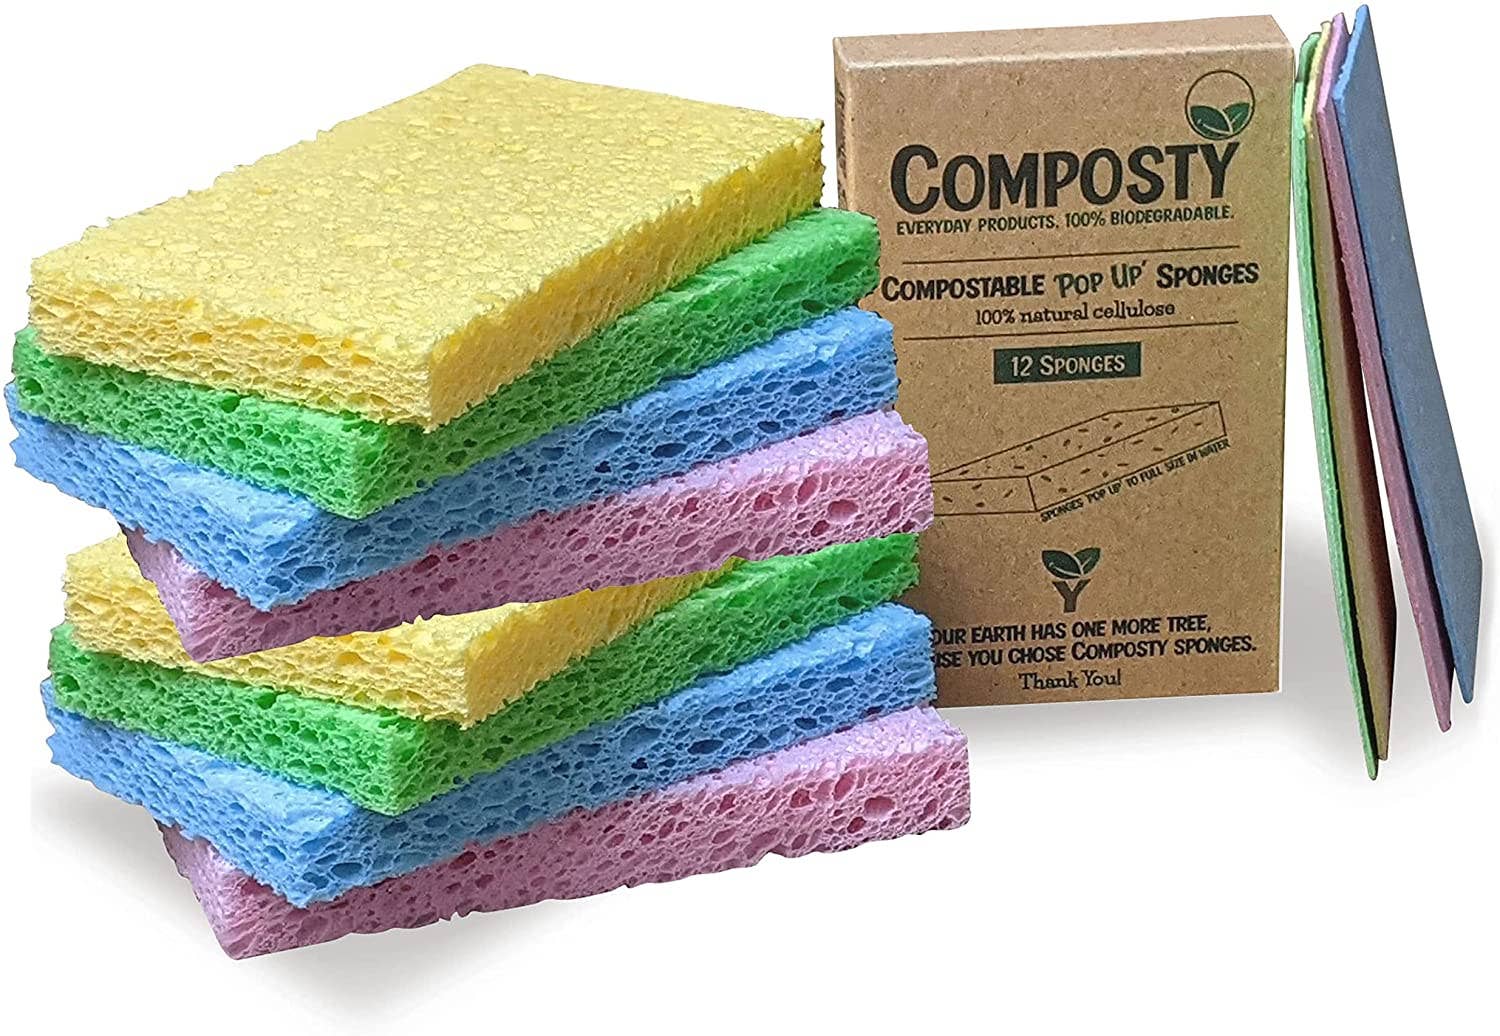 Natural Kitchen Sponge - Biodegradable Compostable Cellulose and